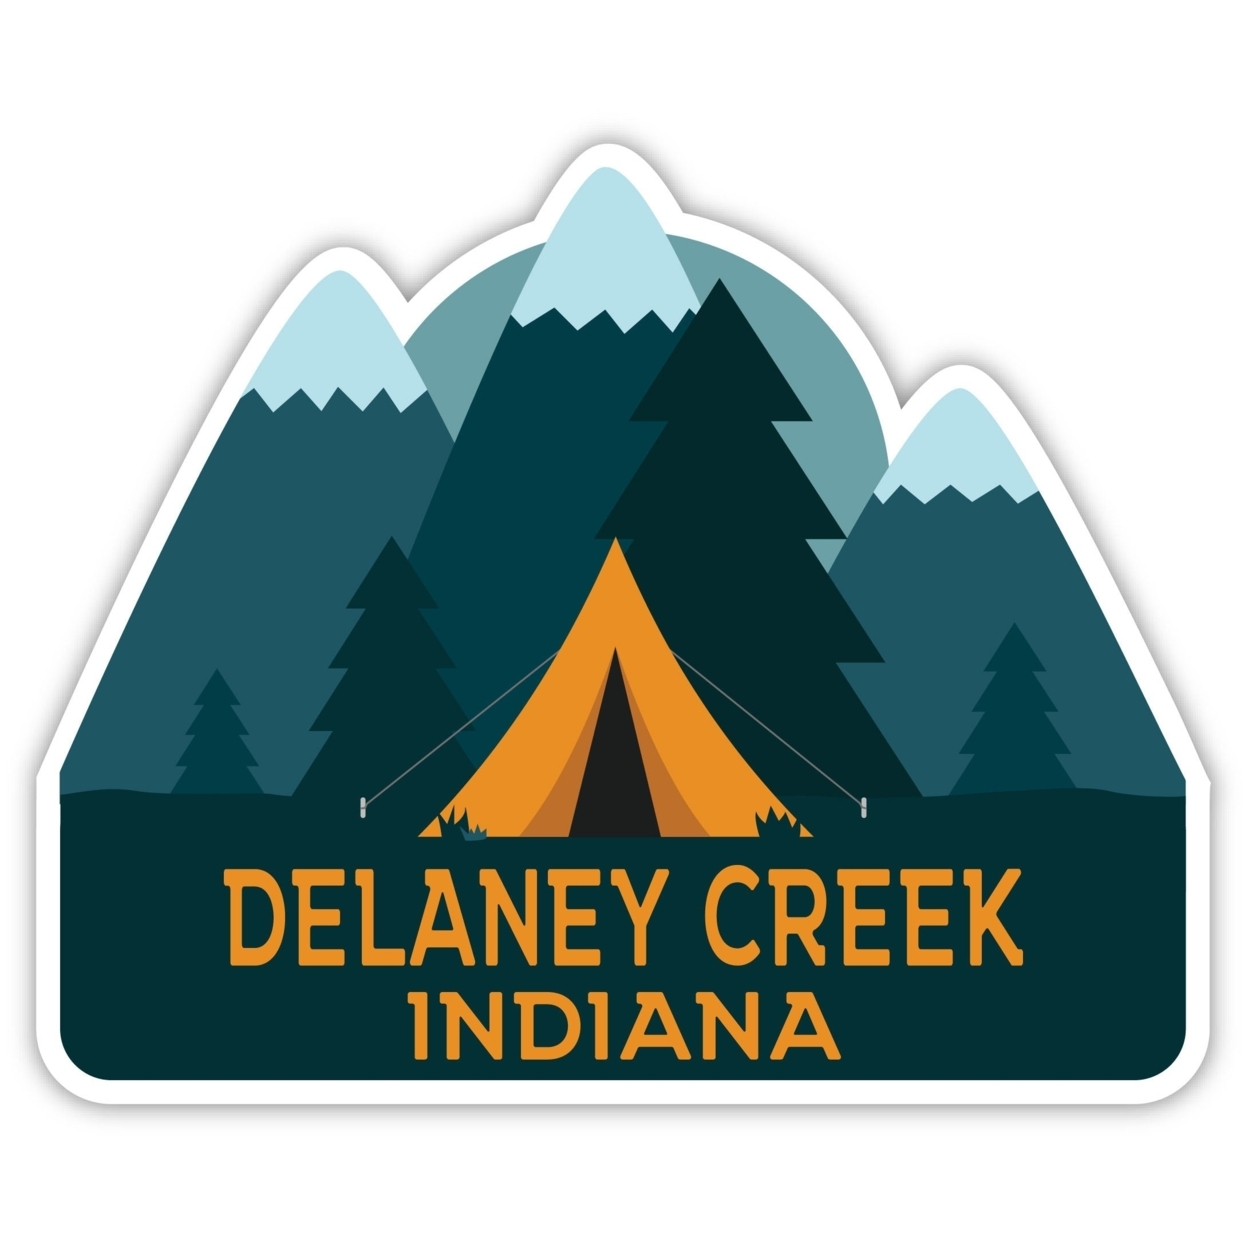 Delaney Creek Indiana Souvenir Decorative Stickers (Choose Theme And Size) - 4-Pack, 12-Inch, Tent